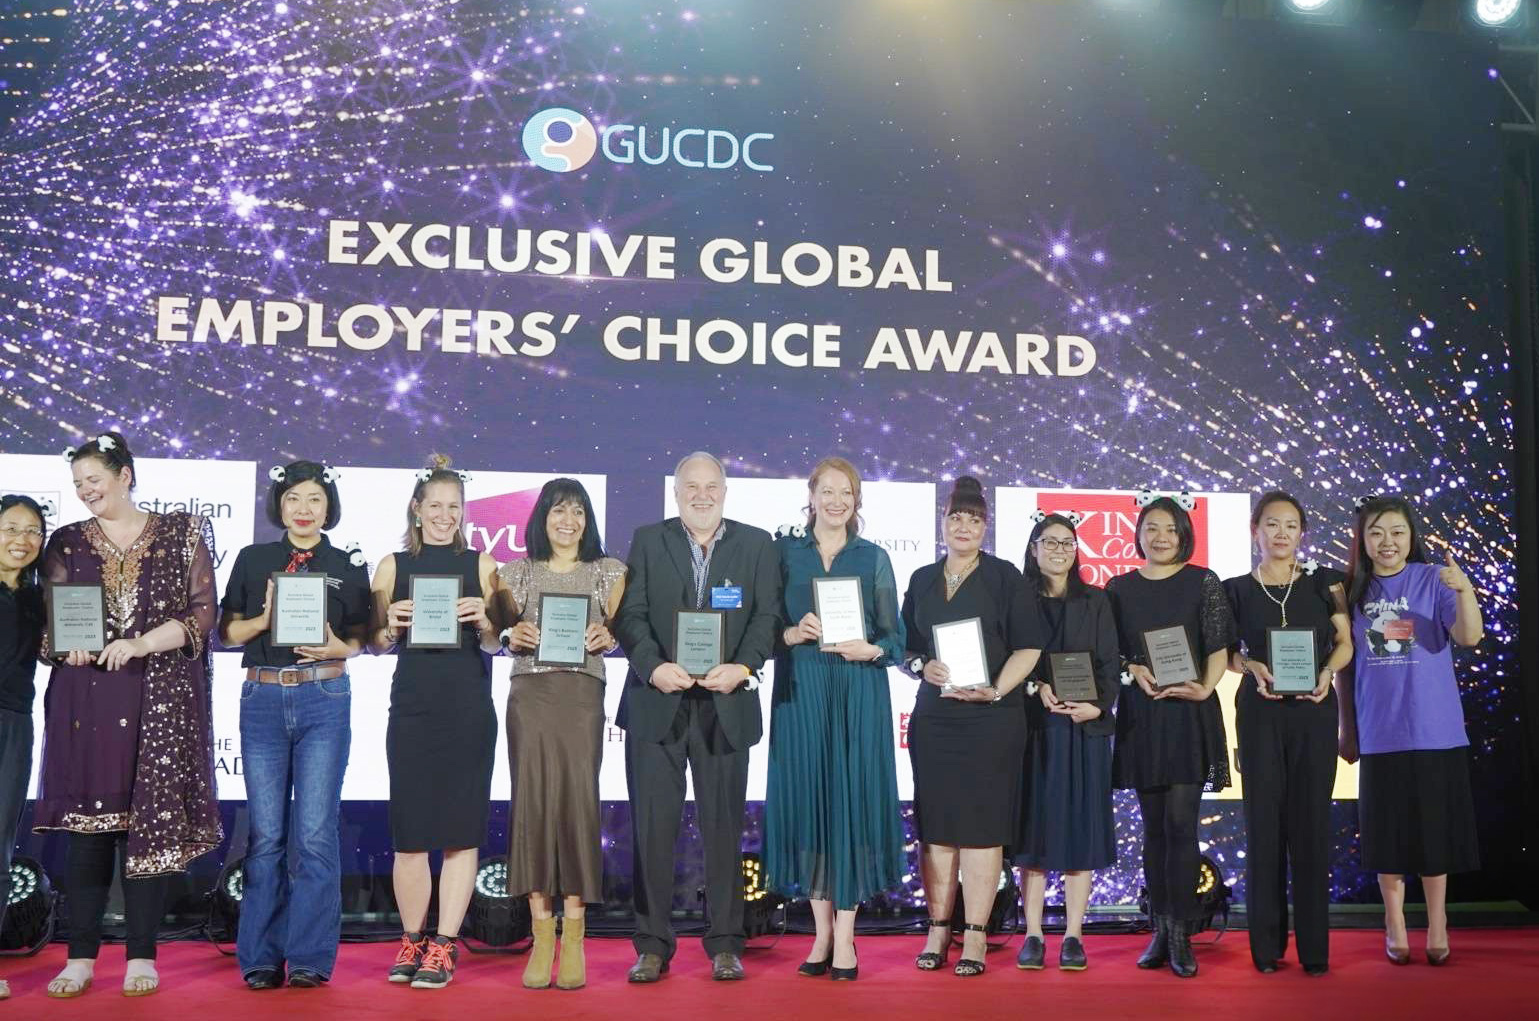 Ms Doris Cheng (3rd from the right), Assistant Director (Business Career Development) of CB, attends the presentation ceremony on the “Exclusive Global Employers’ Choice Award” 